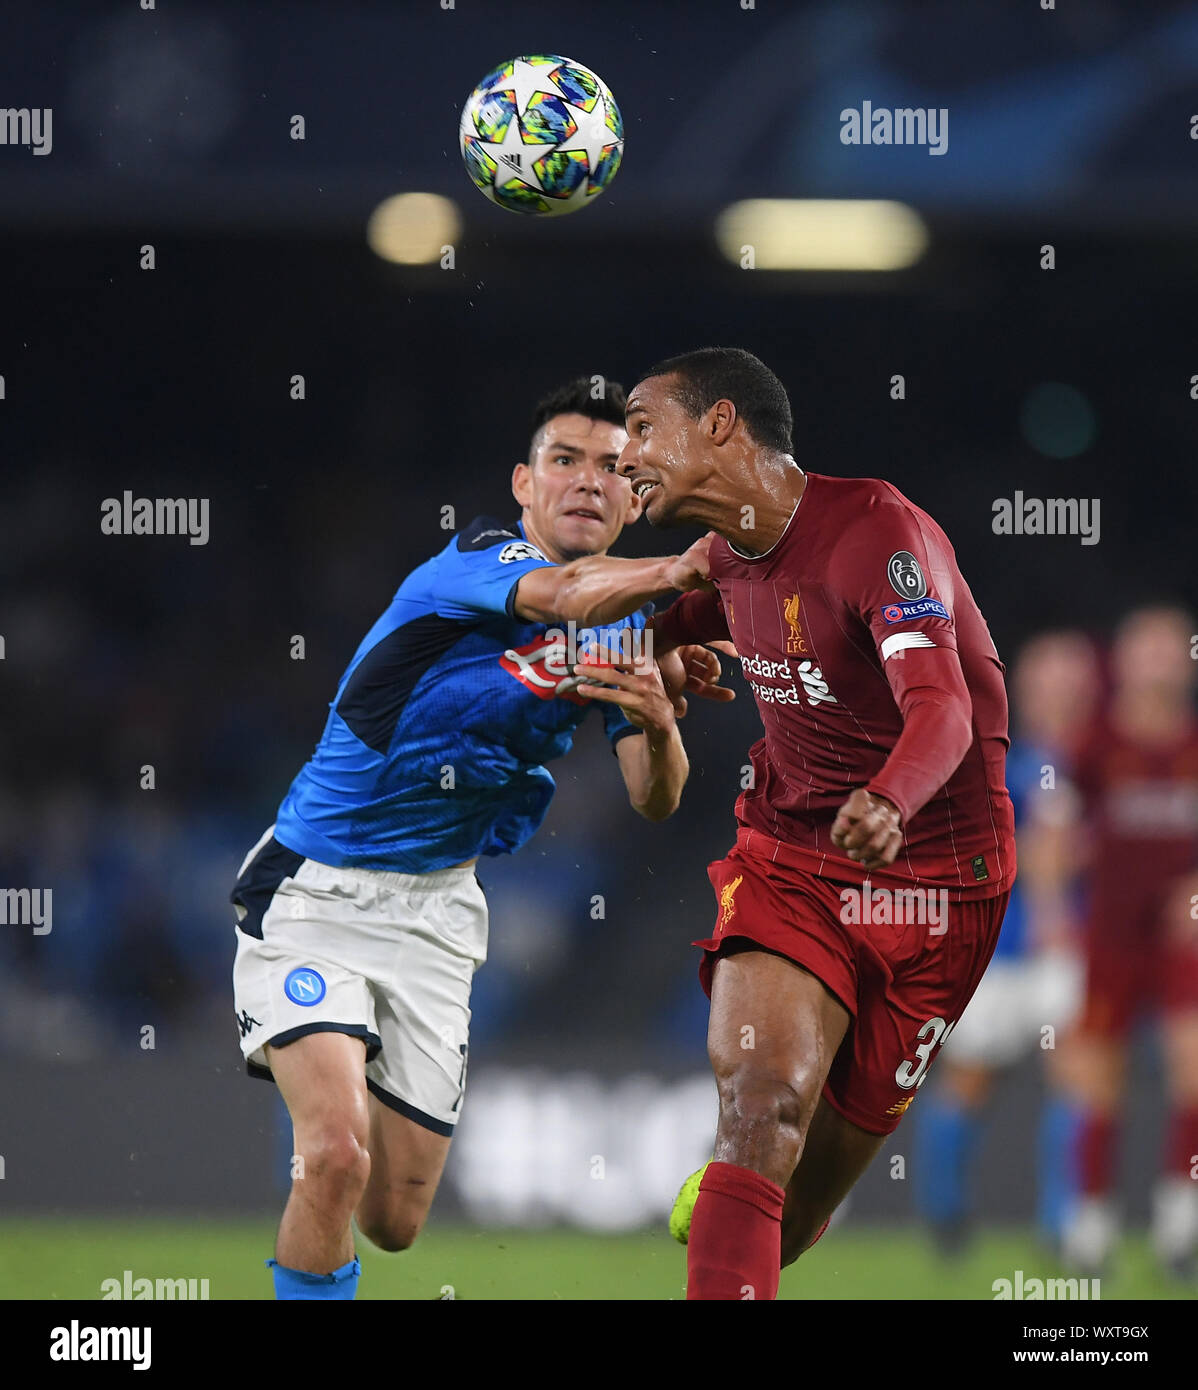 Napoli. 17th Sep, 2019. Napoli's Hirving Lozano (L) vies with Liverpool's Joel Matip during the UEFA Champions League Group E match in Napoli, Italy, Sept.17, 2019. Credit: Alberto Lingria/Xinhua/Alamy Live News Stock Photo